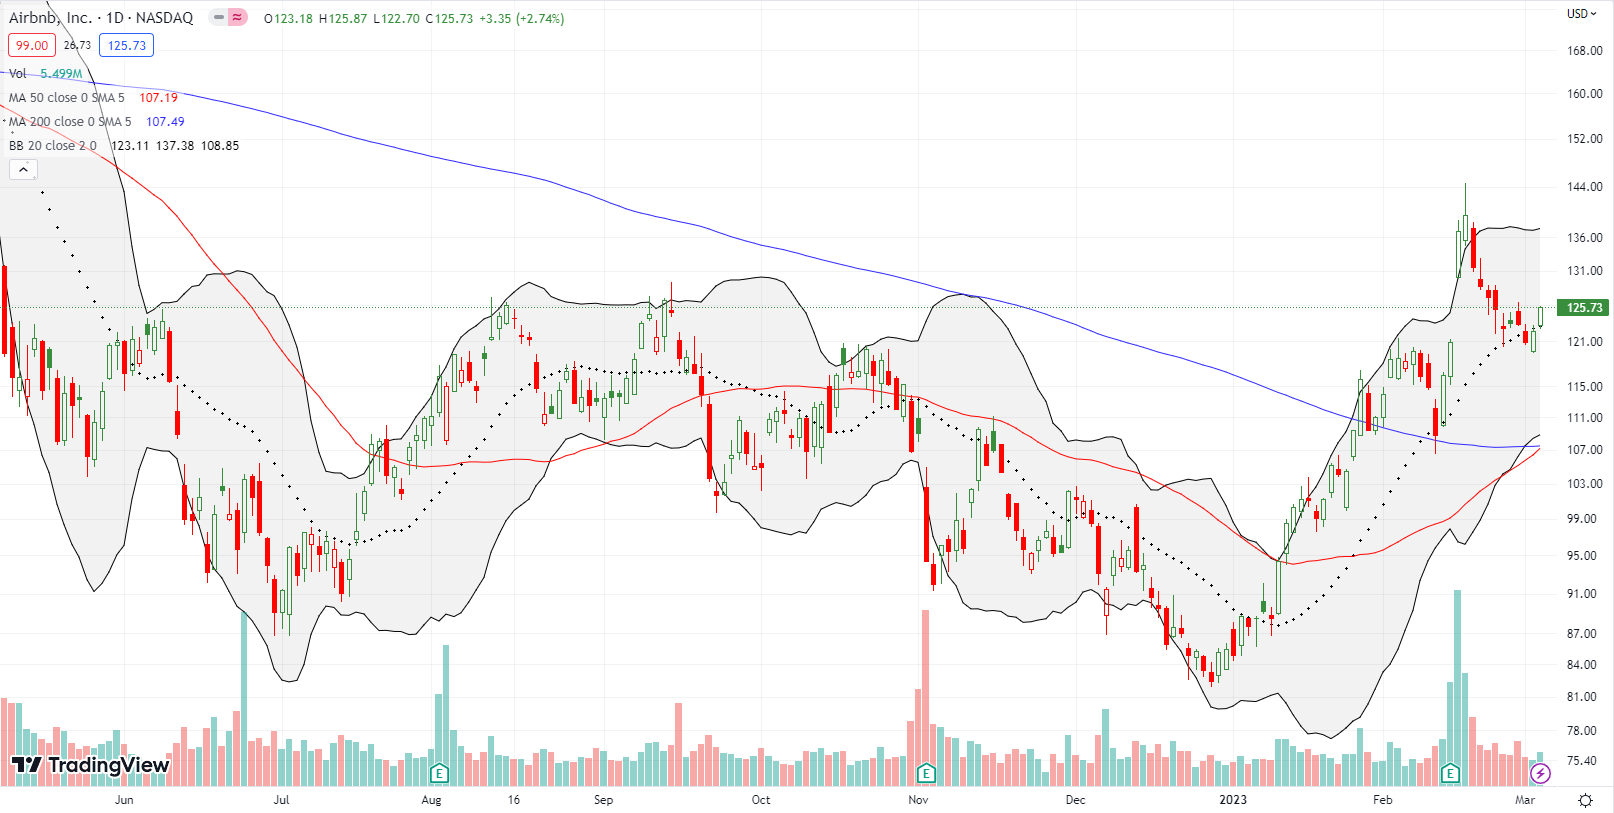 Airbnb Inc (ABNB) stopped selling off only after reversing its post-earnings gains. ABNB held on to its 20DMA uptrend.